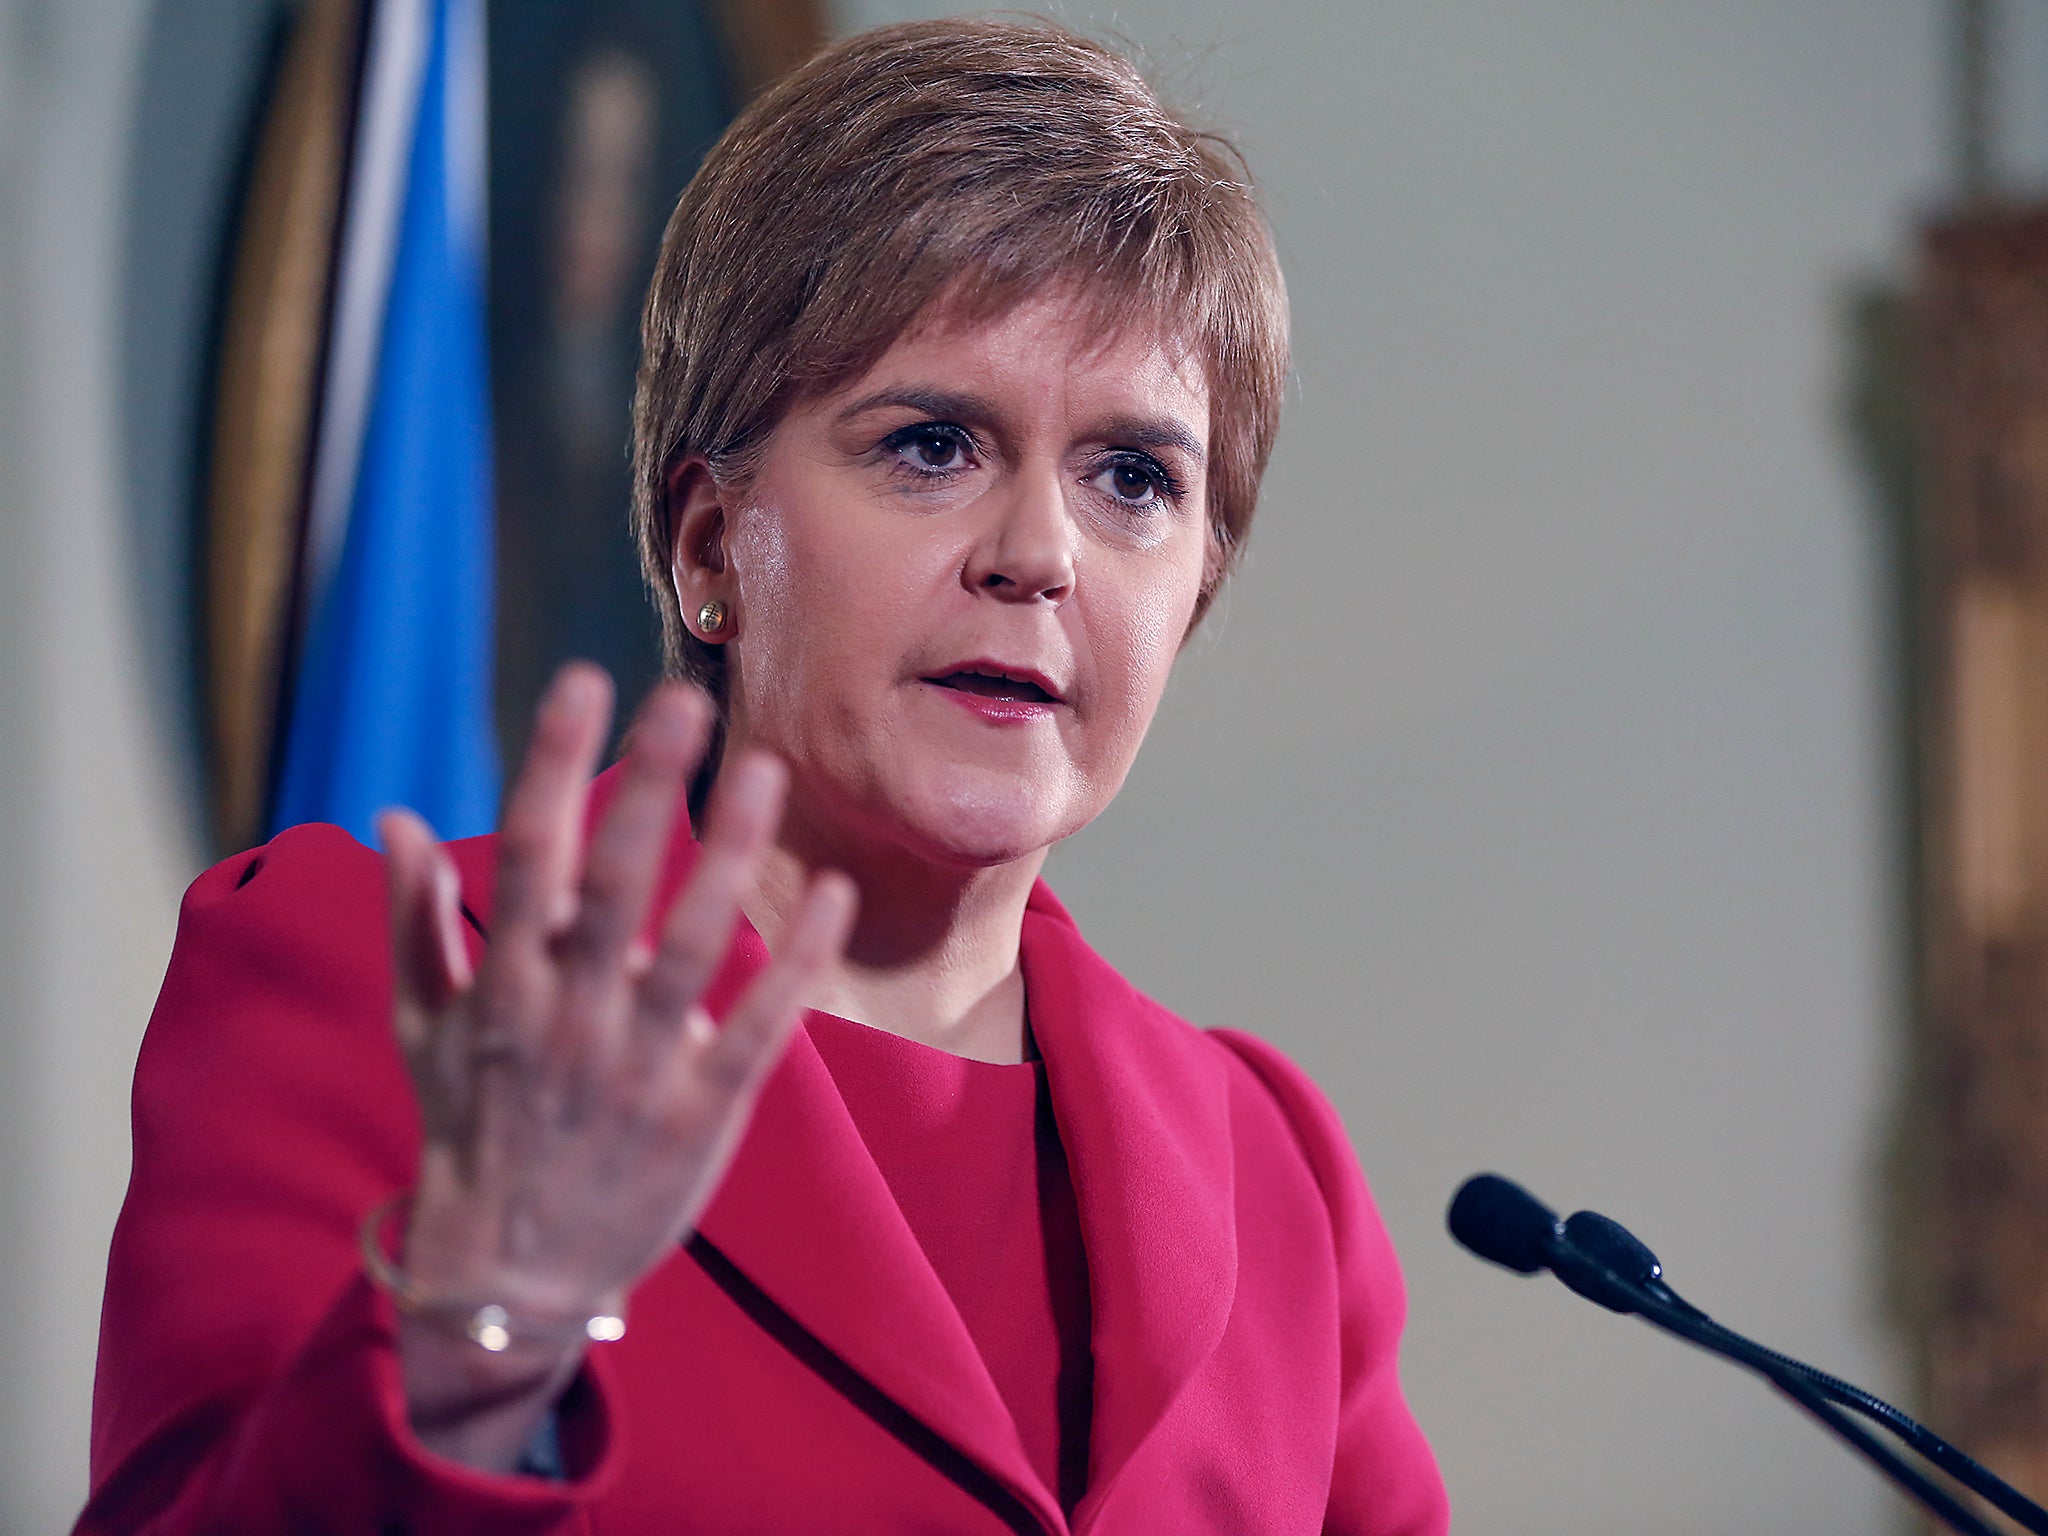 Nicola Sturgeon has apologised to those who lost their loved ones to drug misuse